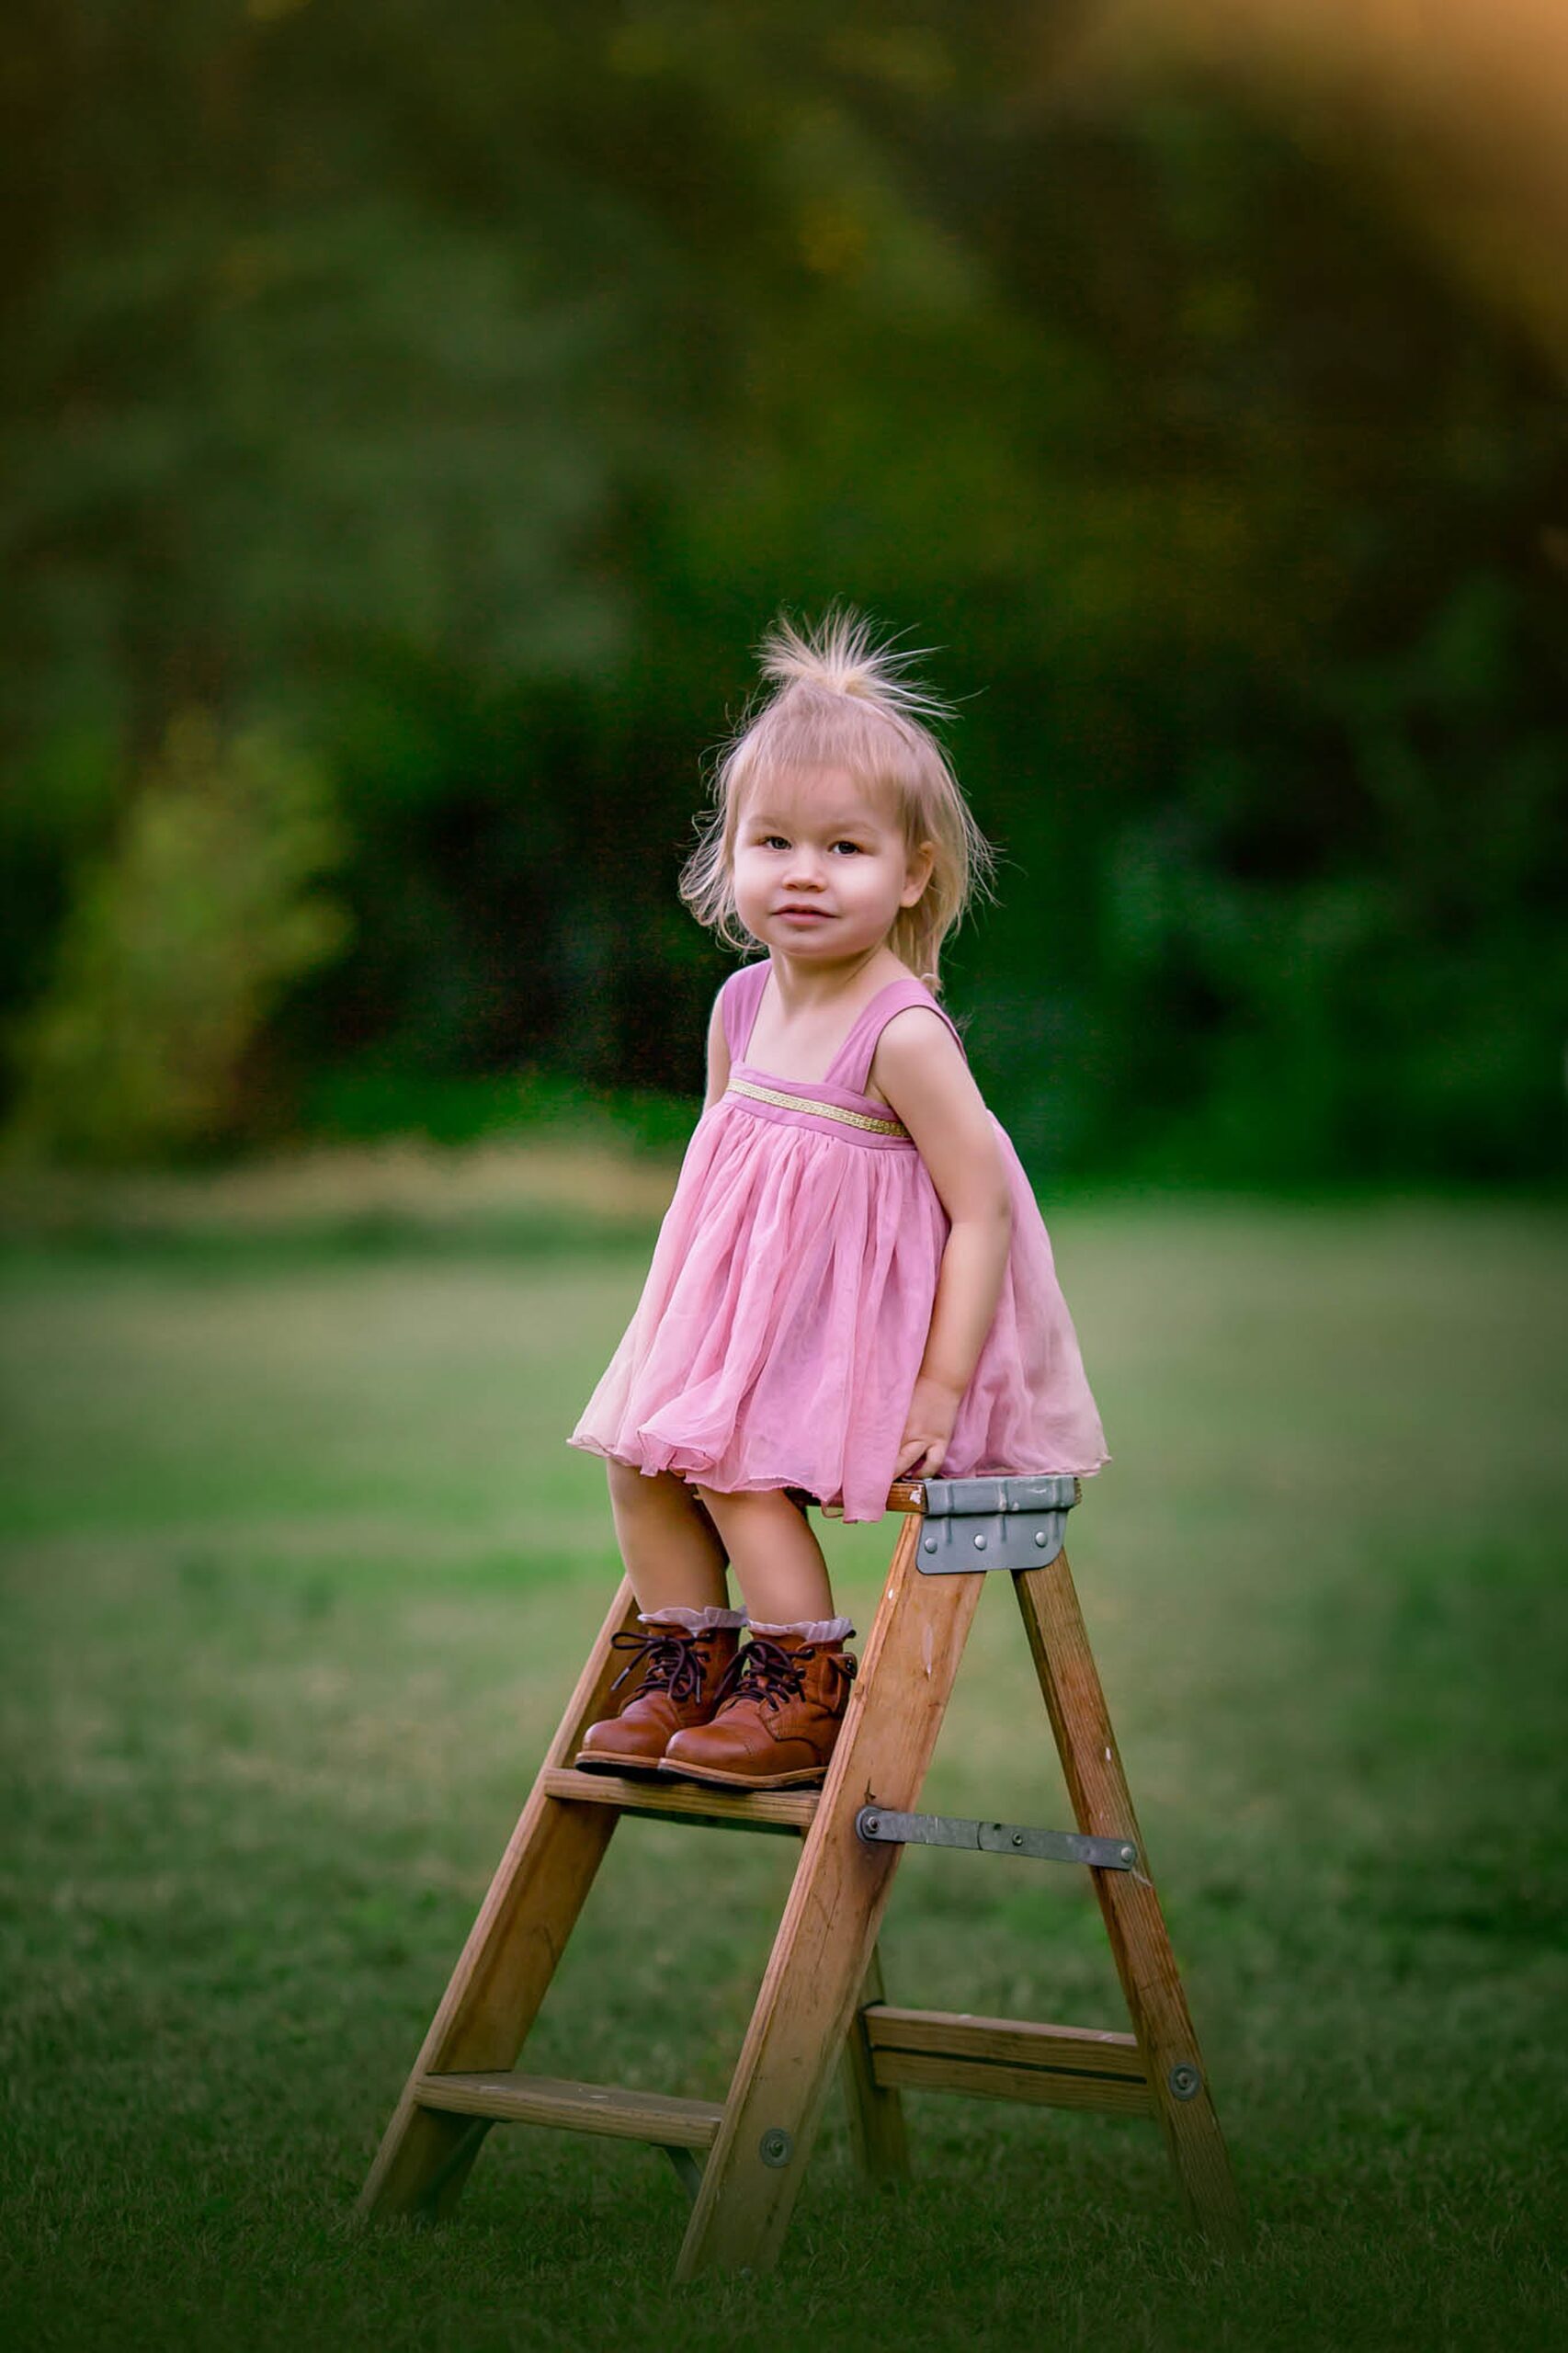 A toddler girl in a pink dress and boots sits on a wooden step stool in a park raleigh playgrounds